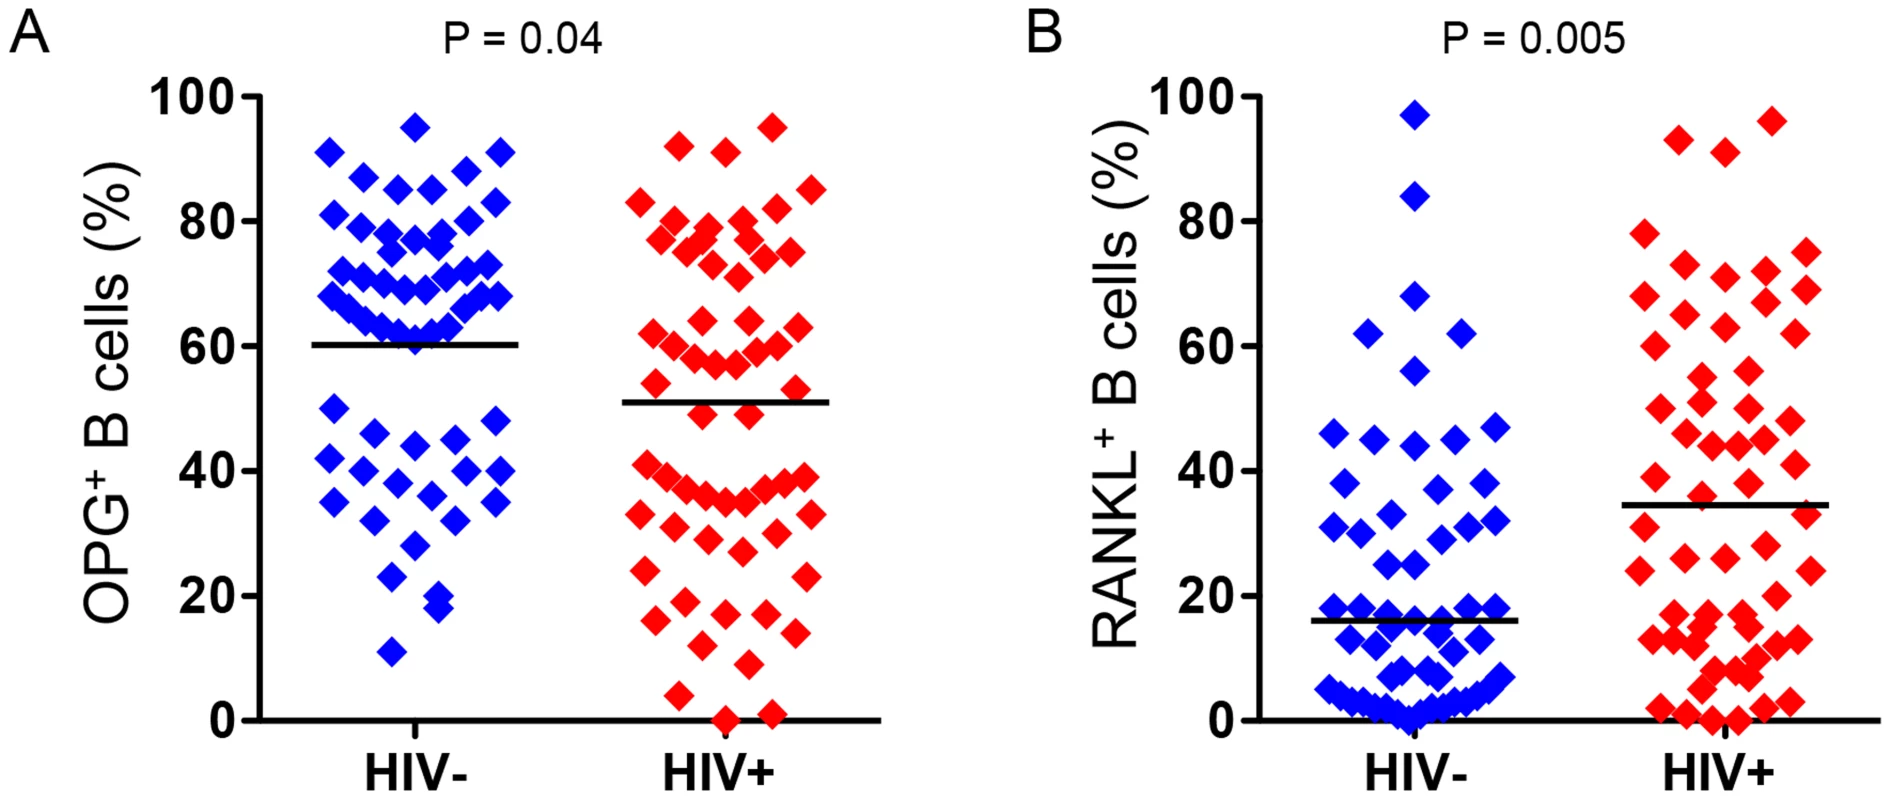 Increased frequency of RANKL-expressing B cells and decreased frequency of OPG-expressing B cells in HIV infection.